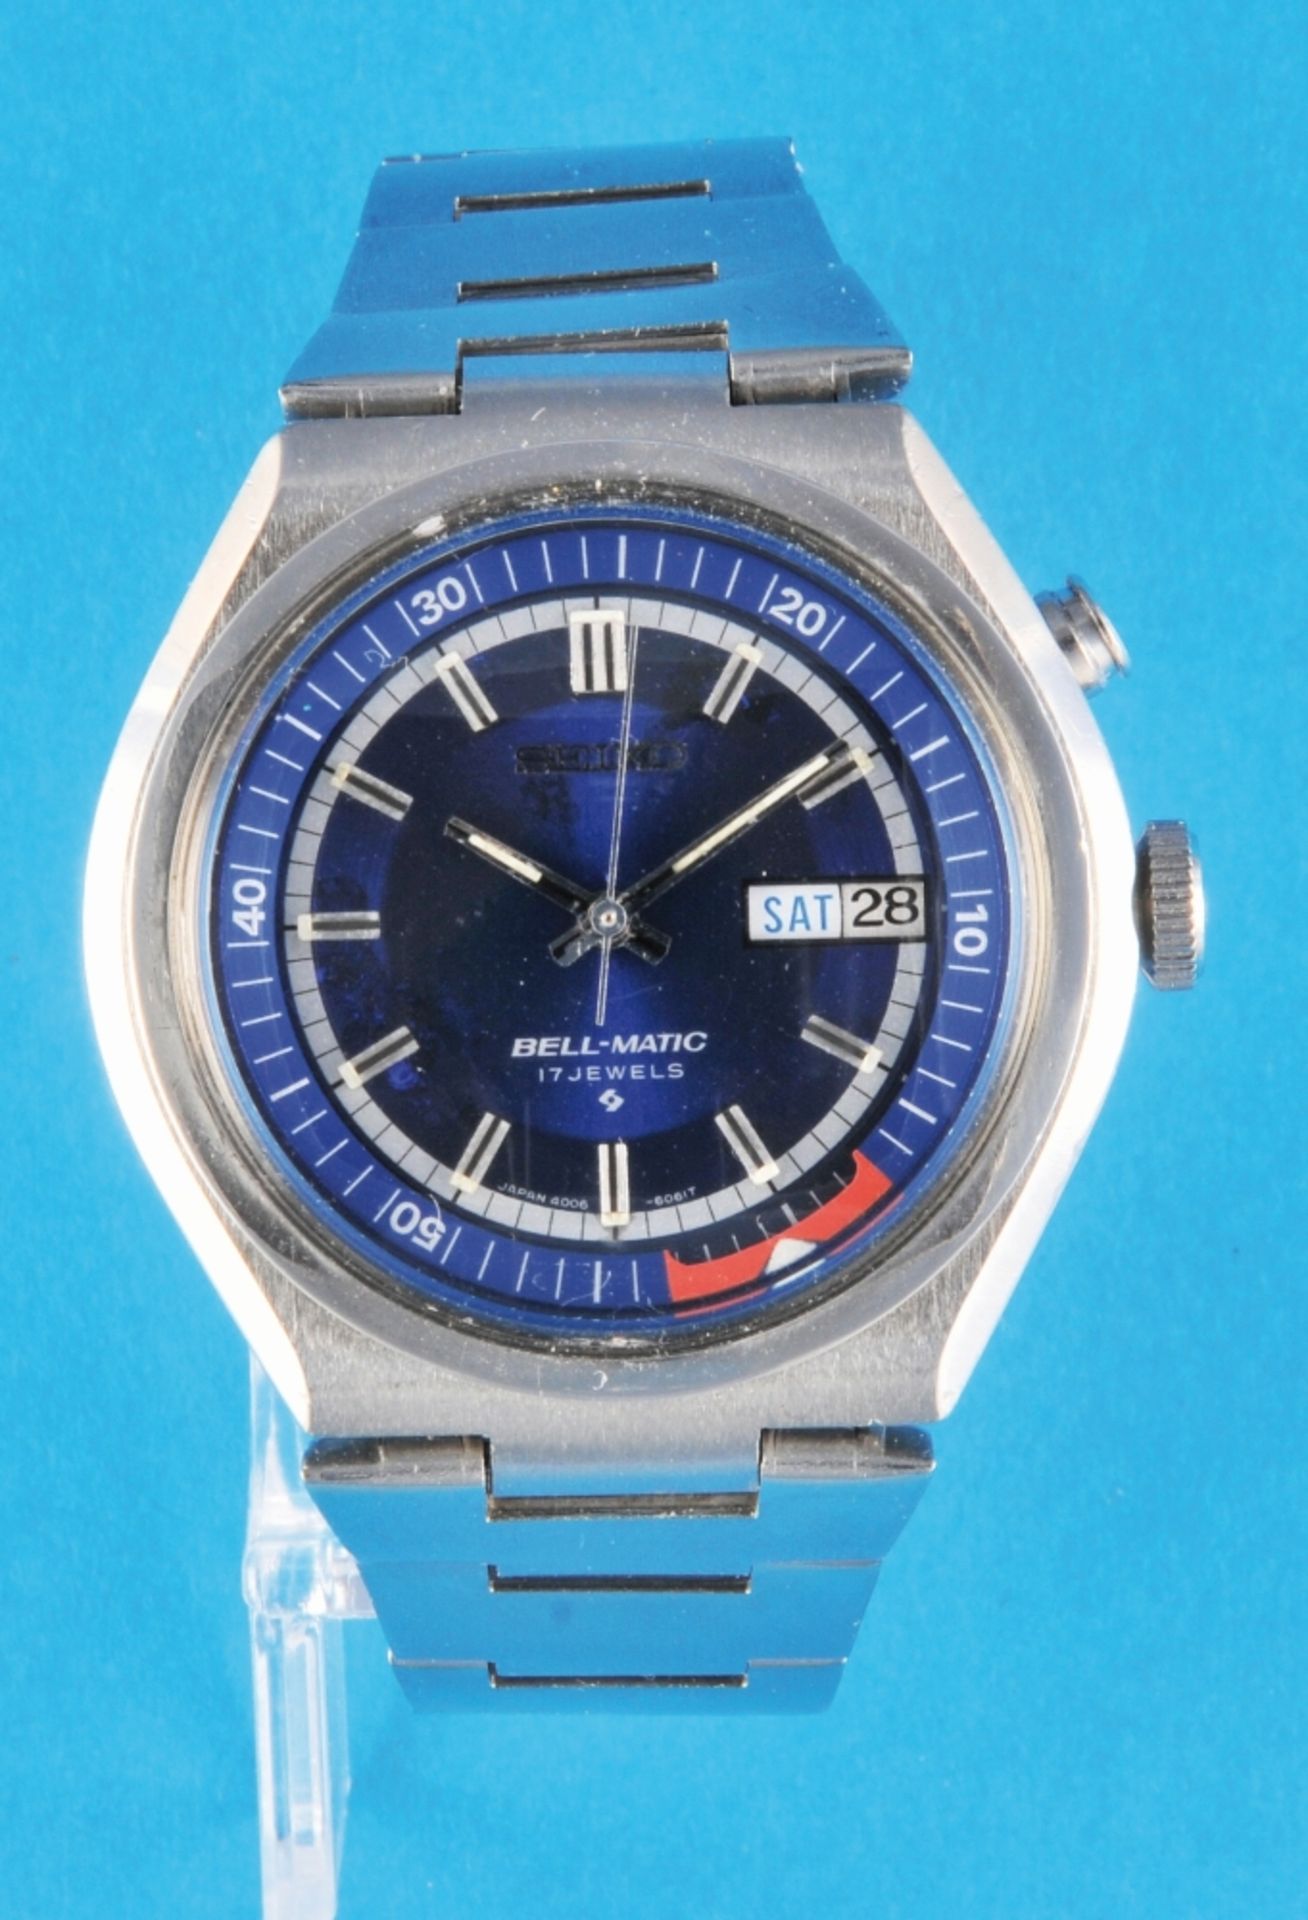 Seiko "Bell-Matic" automatic wrsitwatch with vcalendar